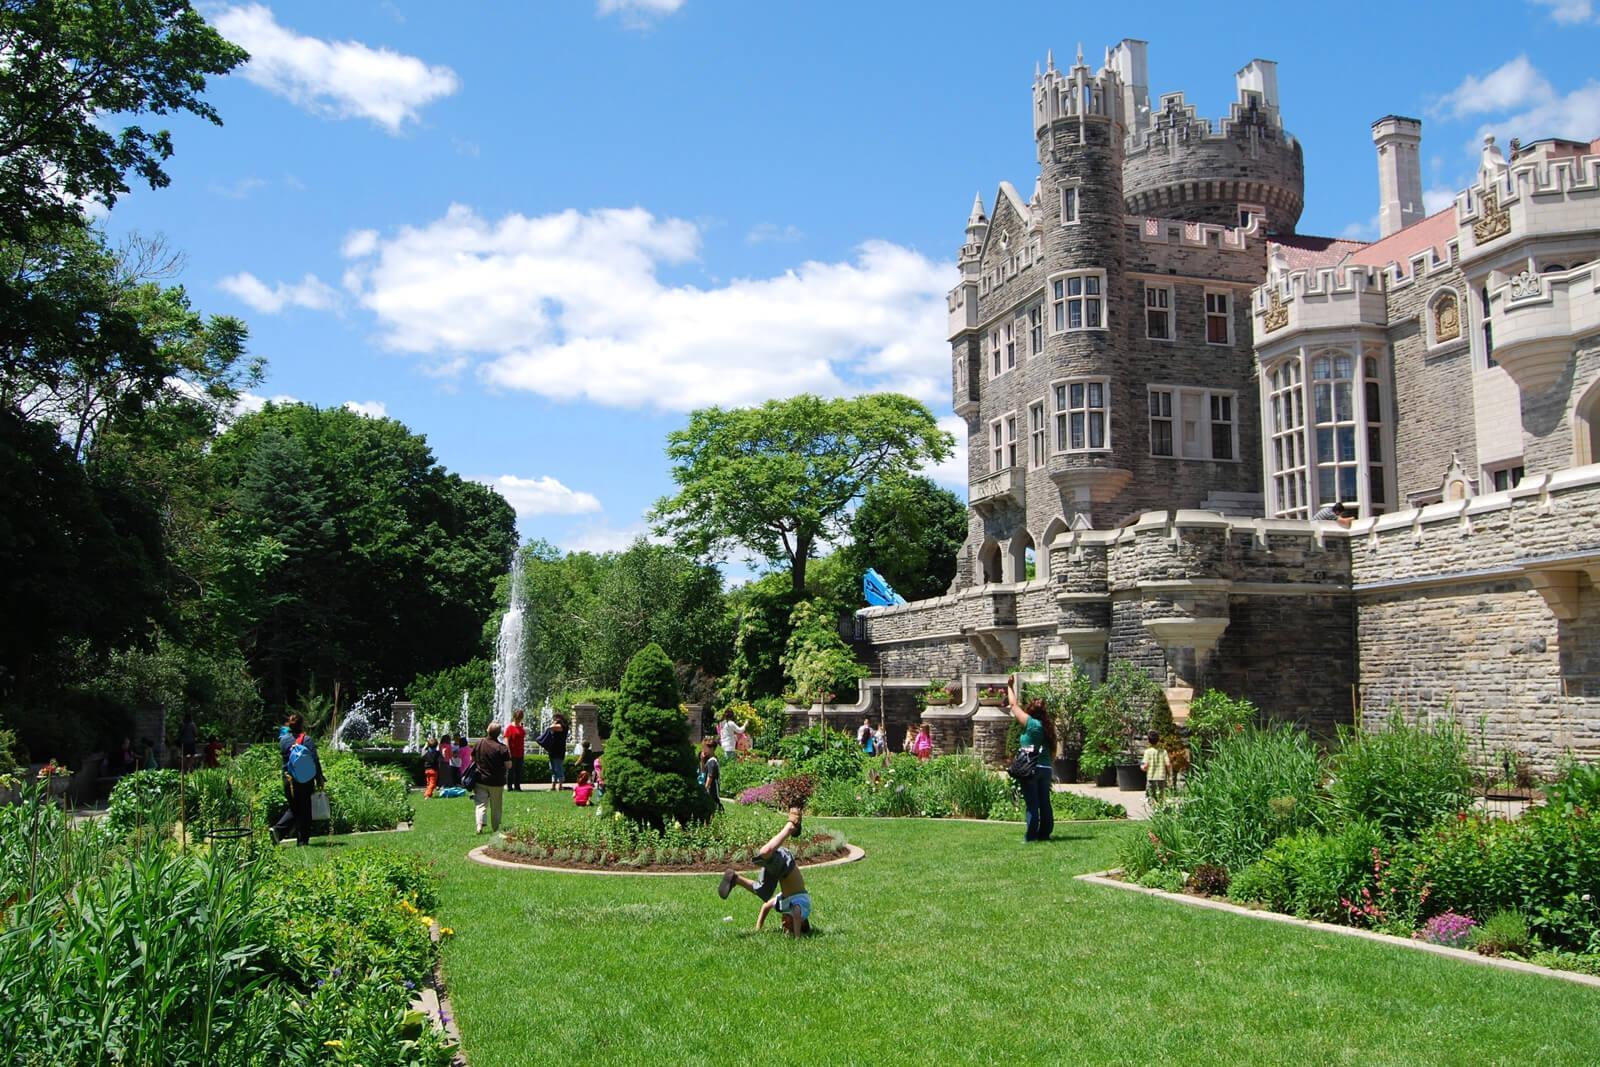 Take time to enjoy one of the many public gardens Ontario has to offer